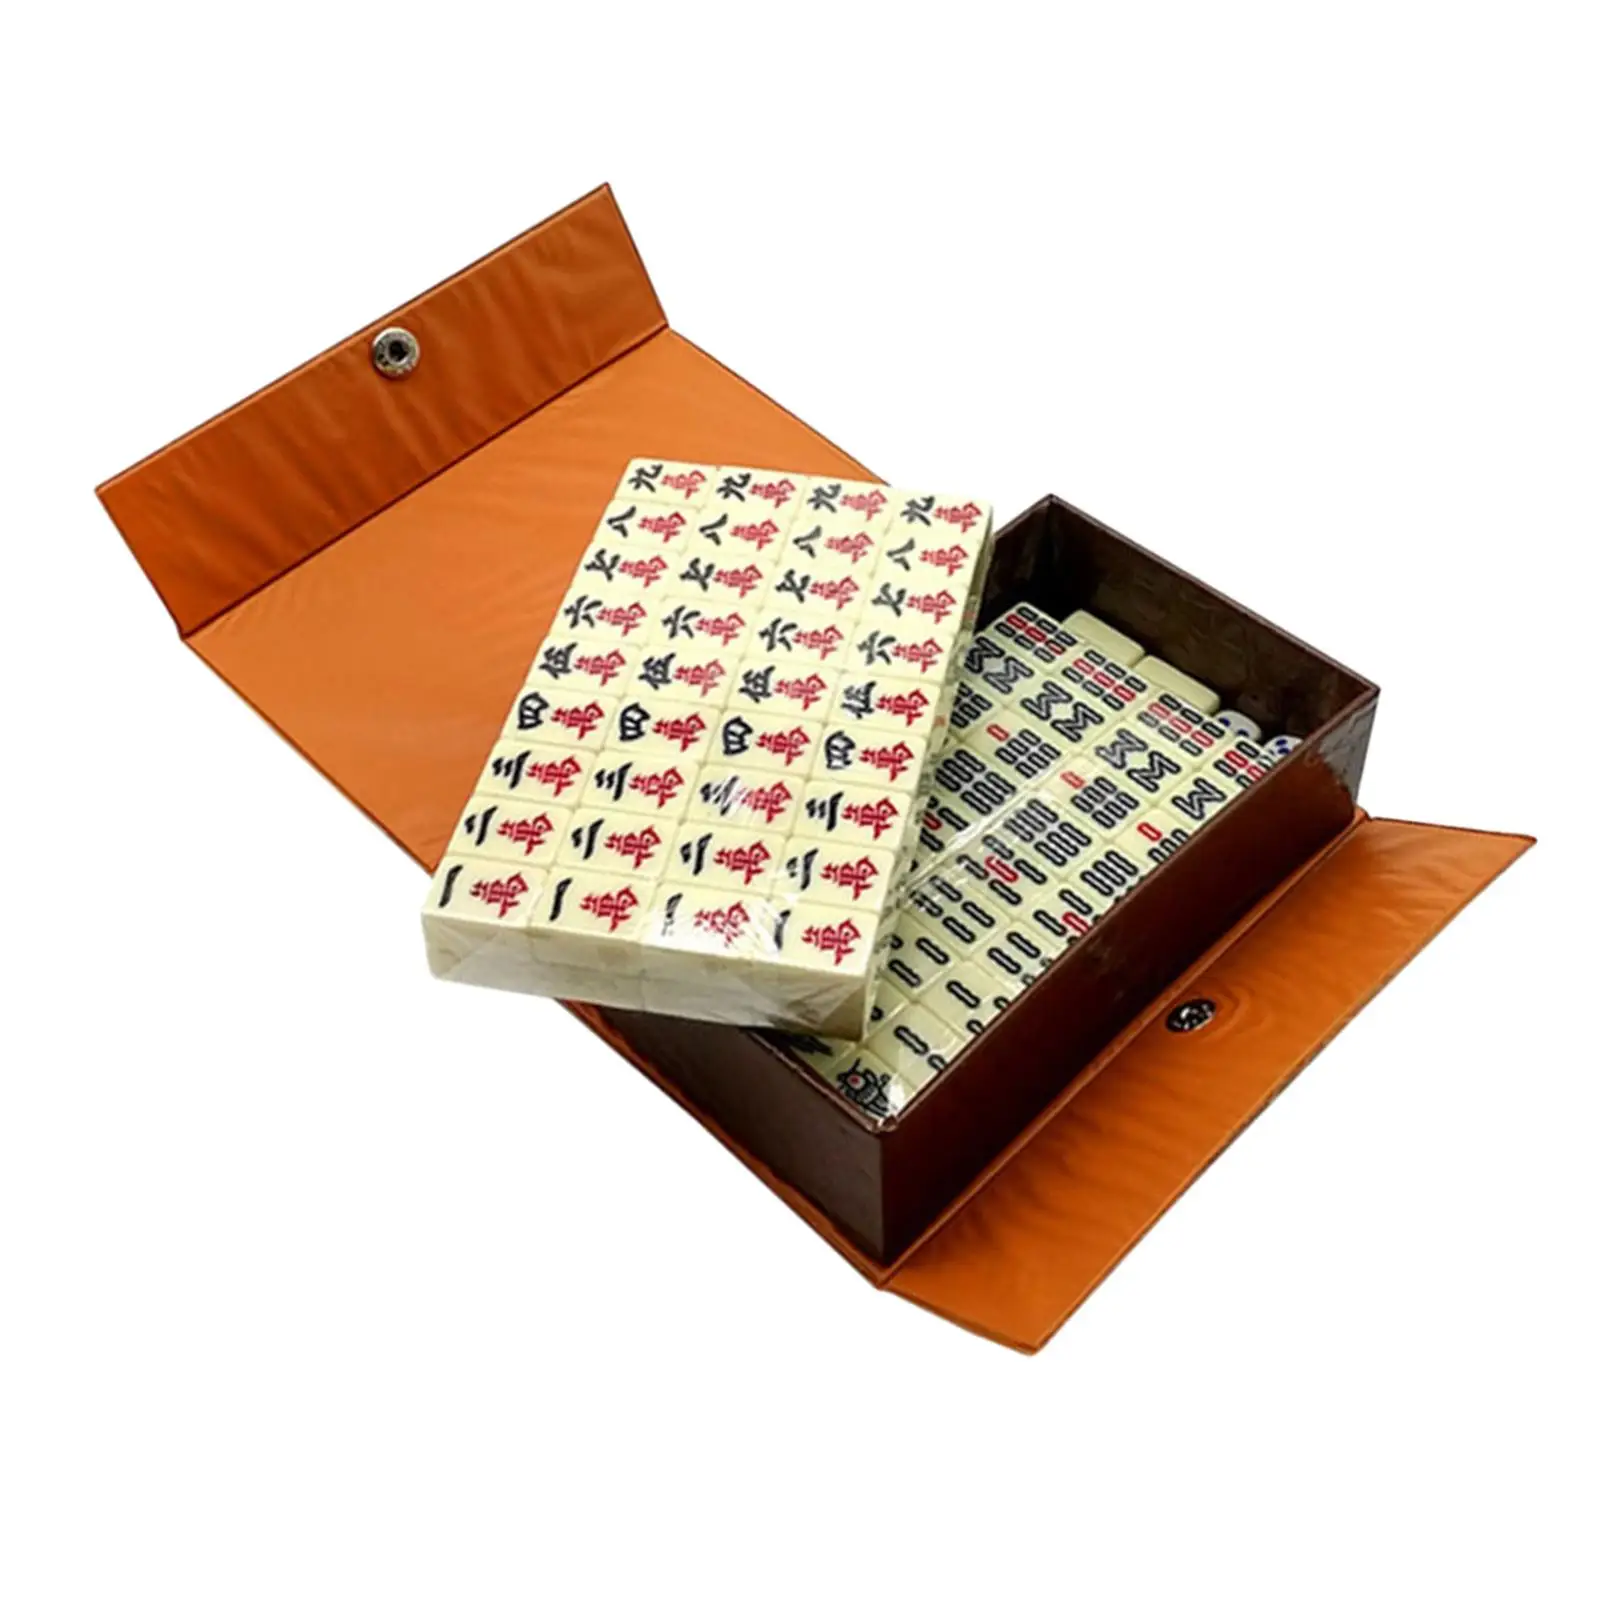 Portable Travel Mahjong Set  Game Entertainment with Carry Case Chinese Mahjong Game Set for Boys Girls Adults